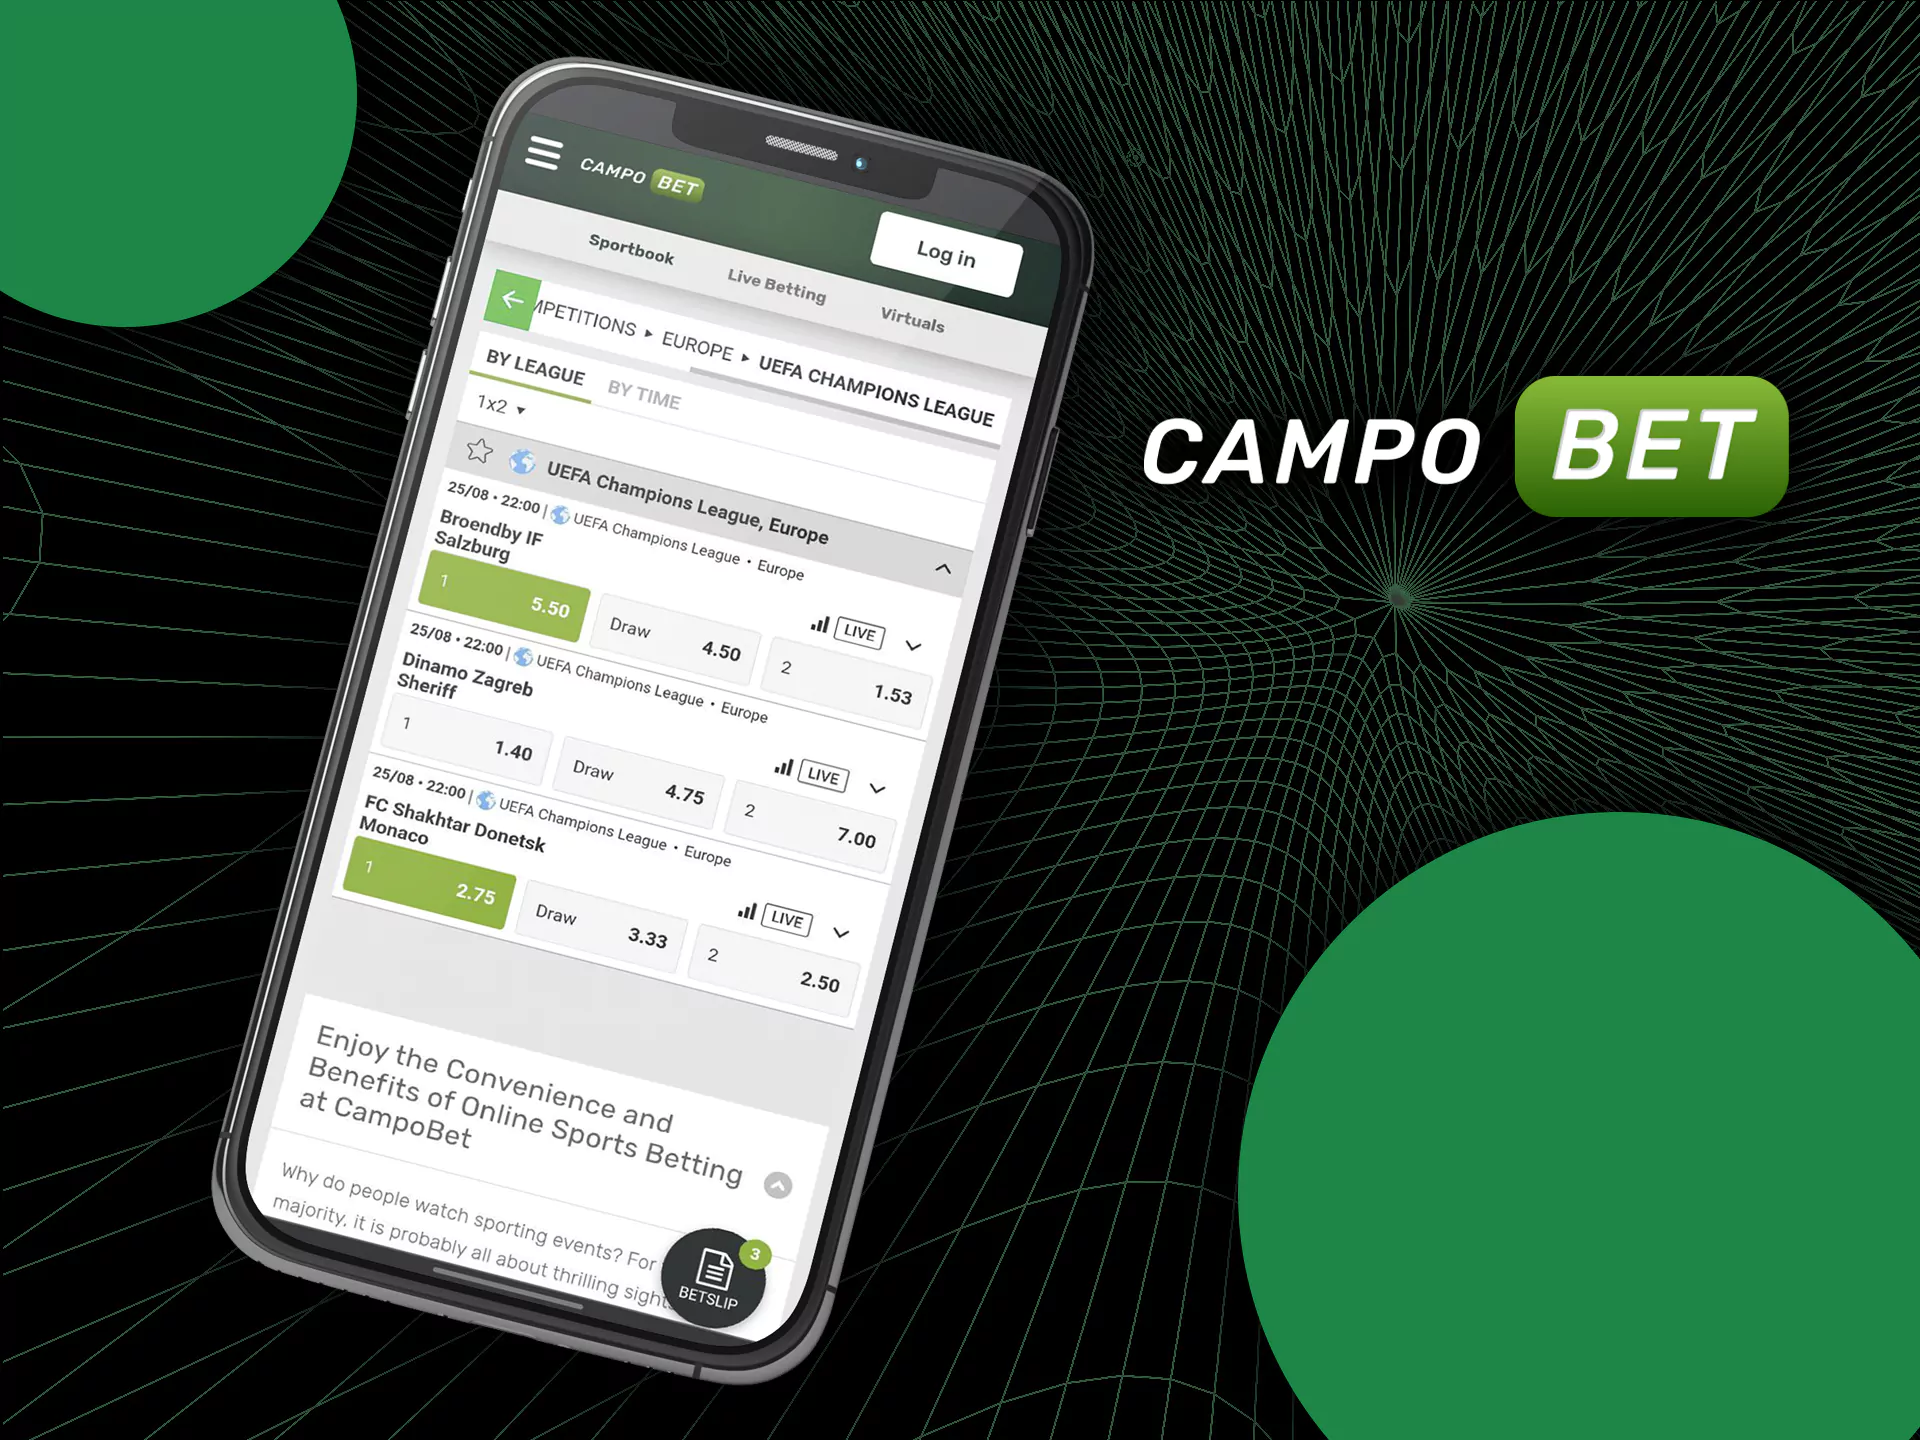 The Campobet team created a great app for their users with access to betting, playing casino games, and getting bonuses.